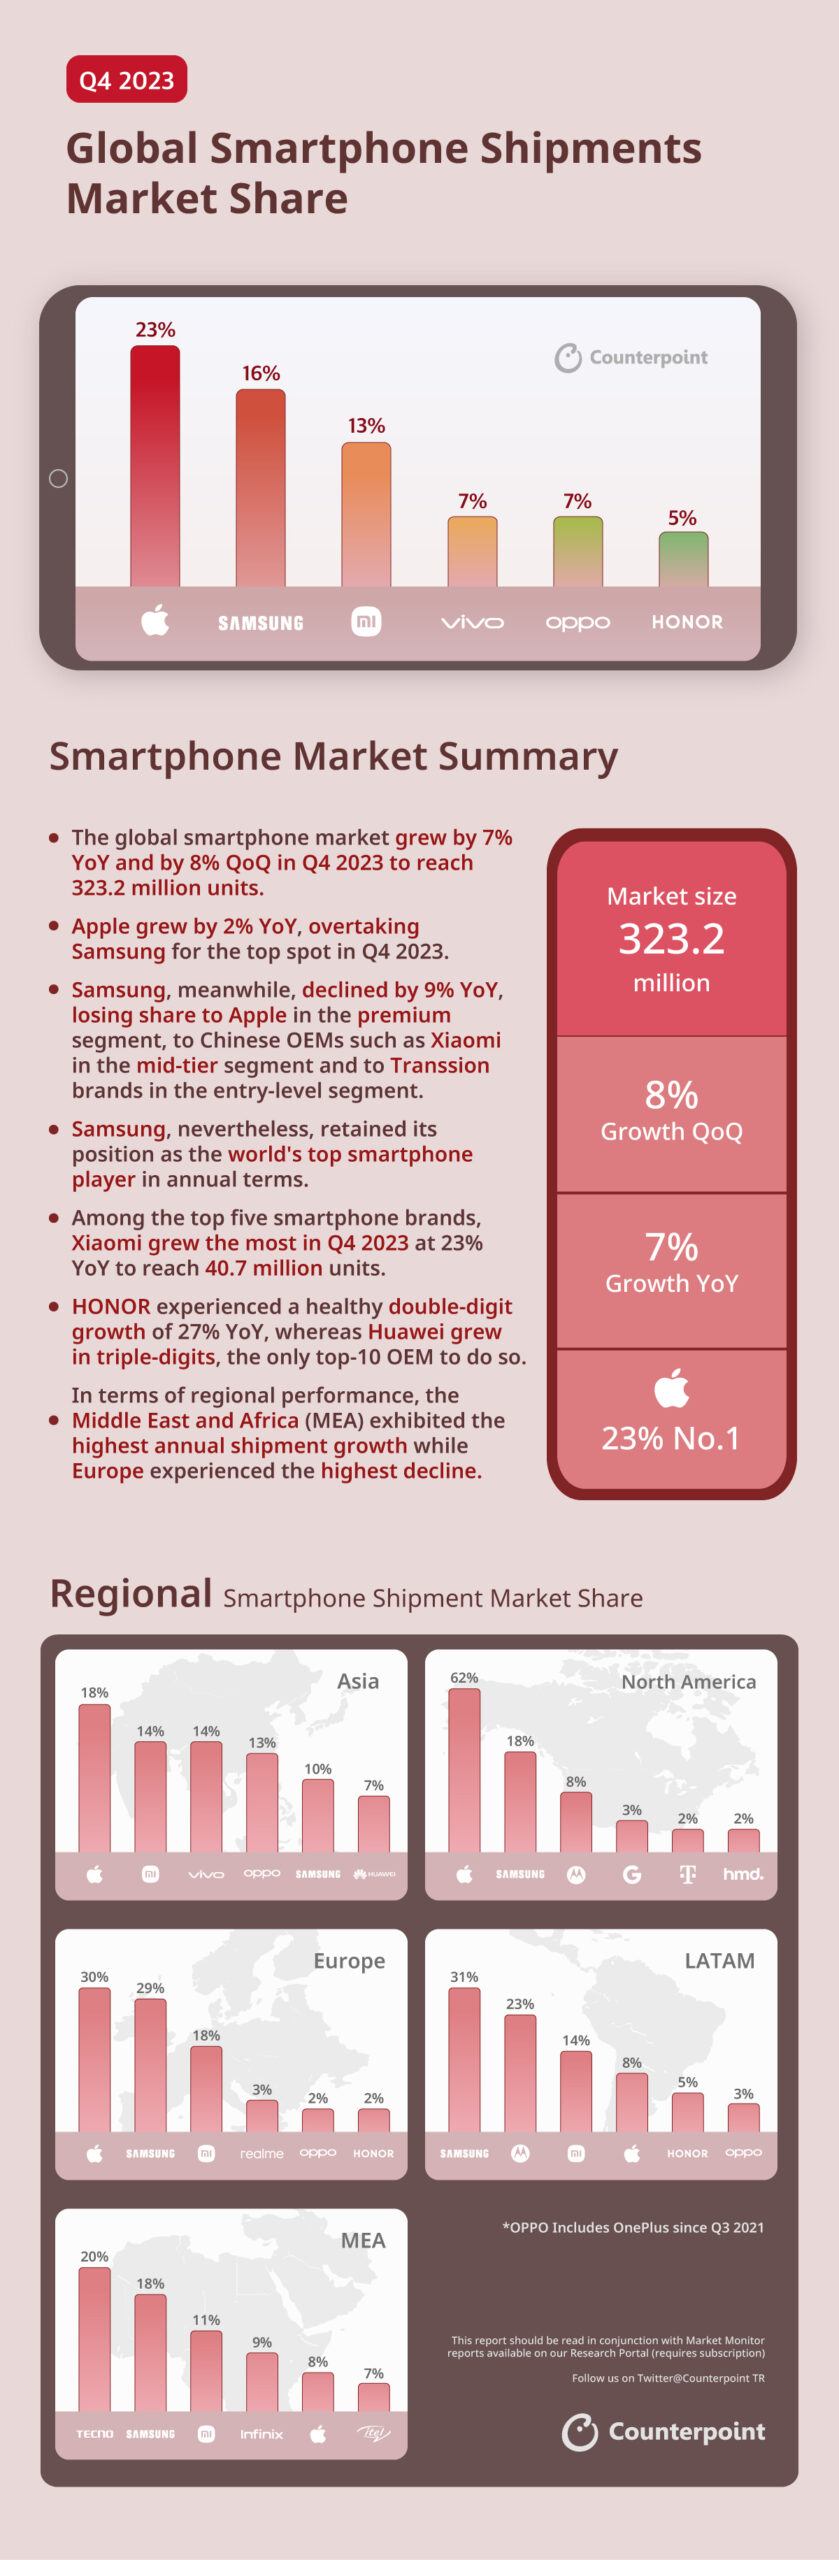 Counterpoint Smartphone Infographic - Q4 2023